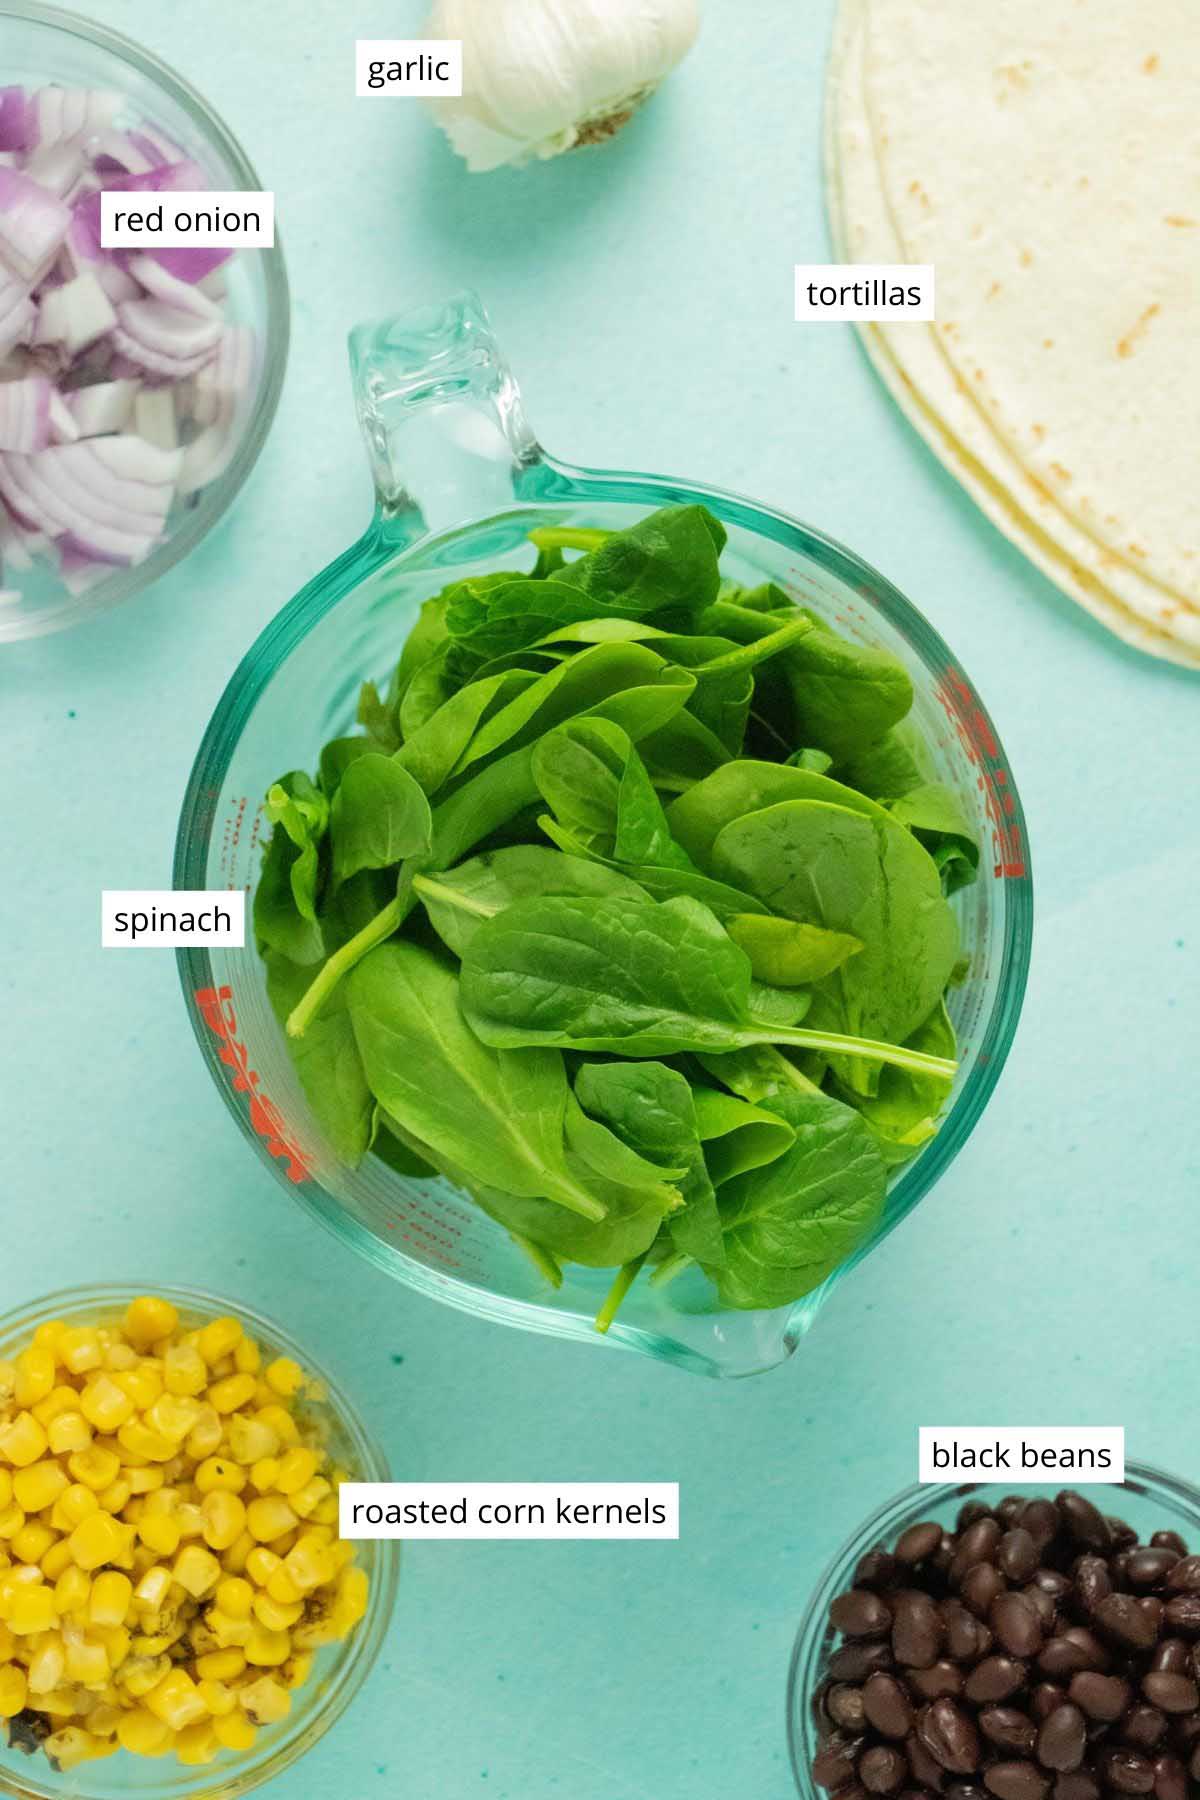 spinach, beans, and other veggies in bowls on a blue table